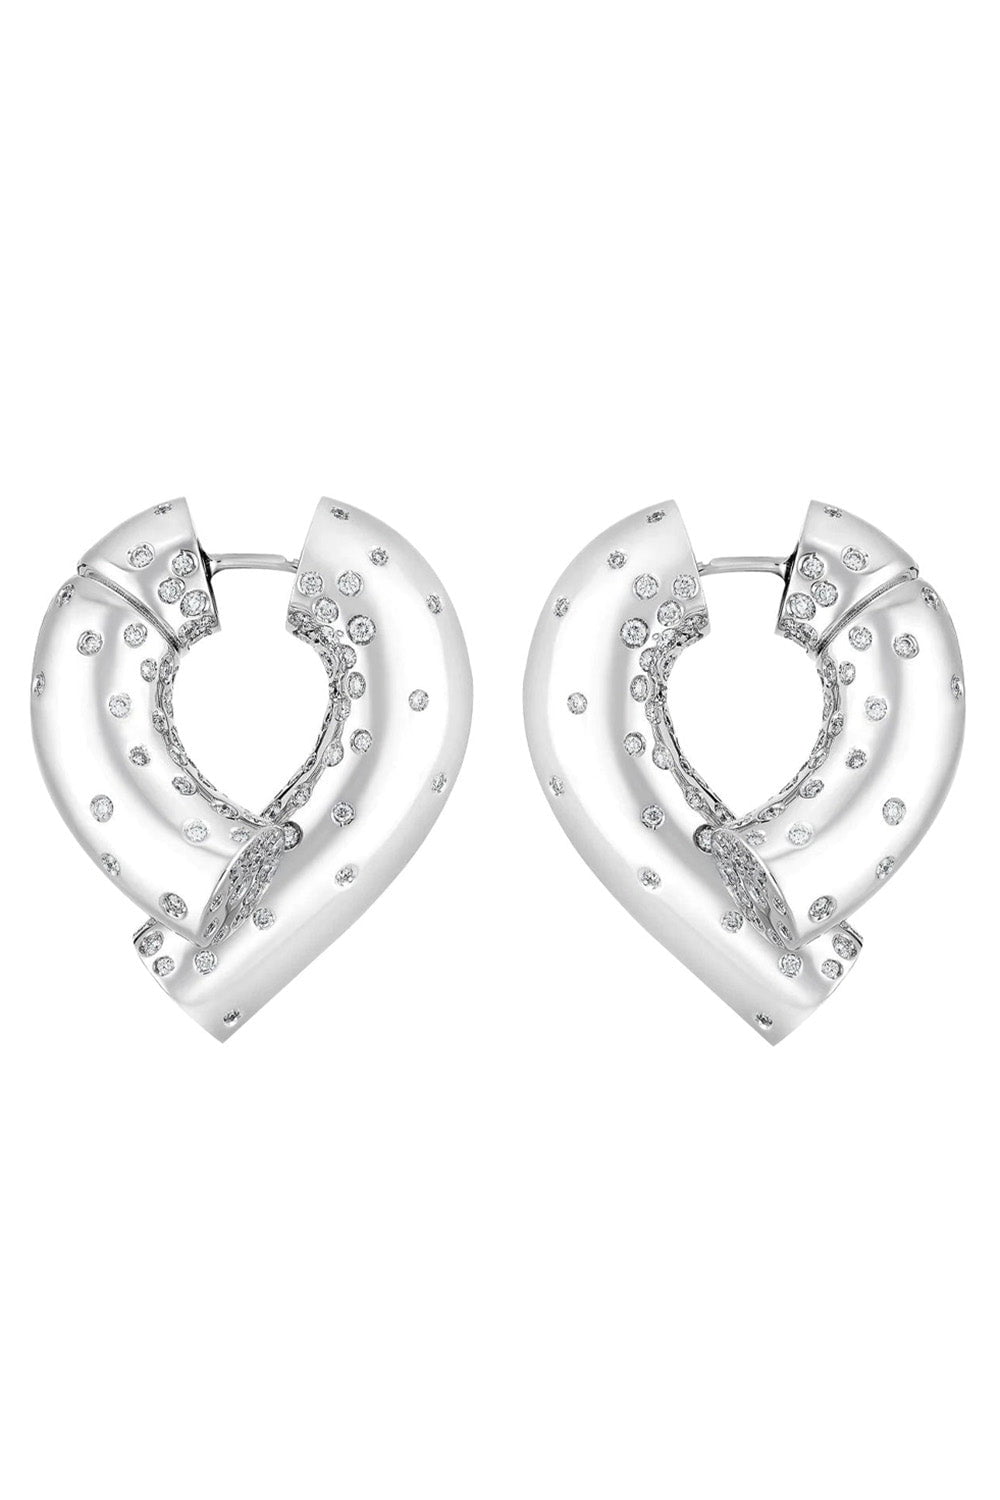 TABAYER-White Gold Large Pave Diamond Oera Hoop Earrings-WHITE GOLD